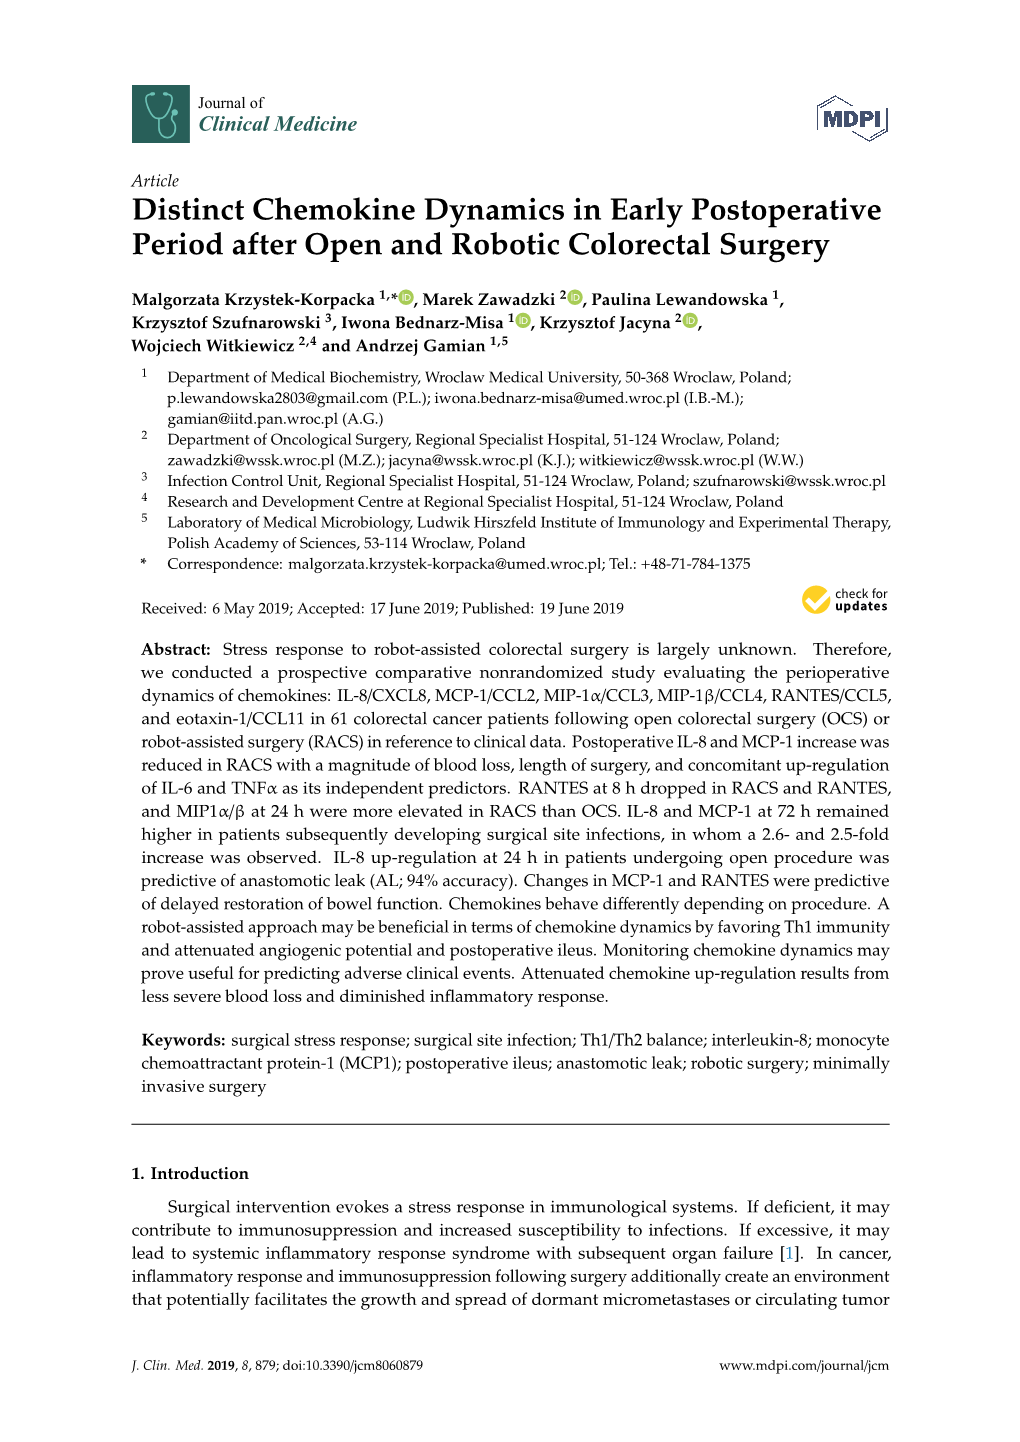 Distinct Chemokine Dynamics in Early Postoperative Period After Open and Robotic Colorectal Surgery